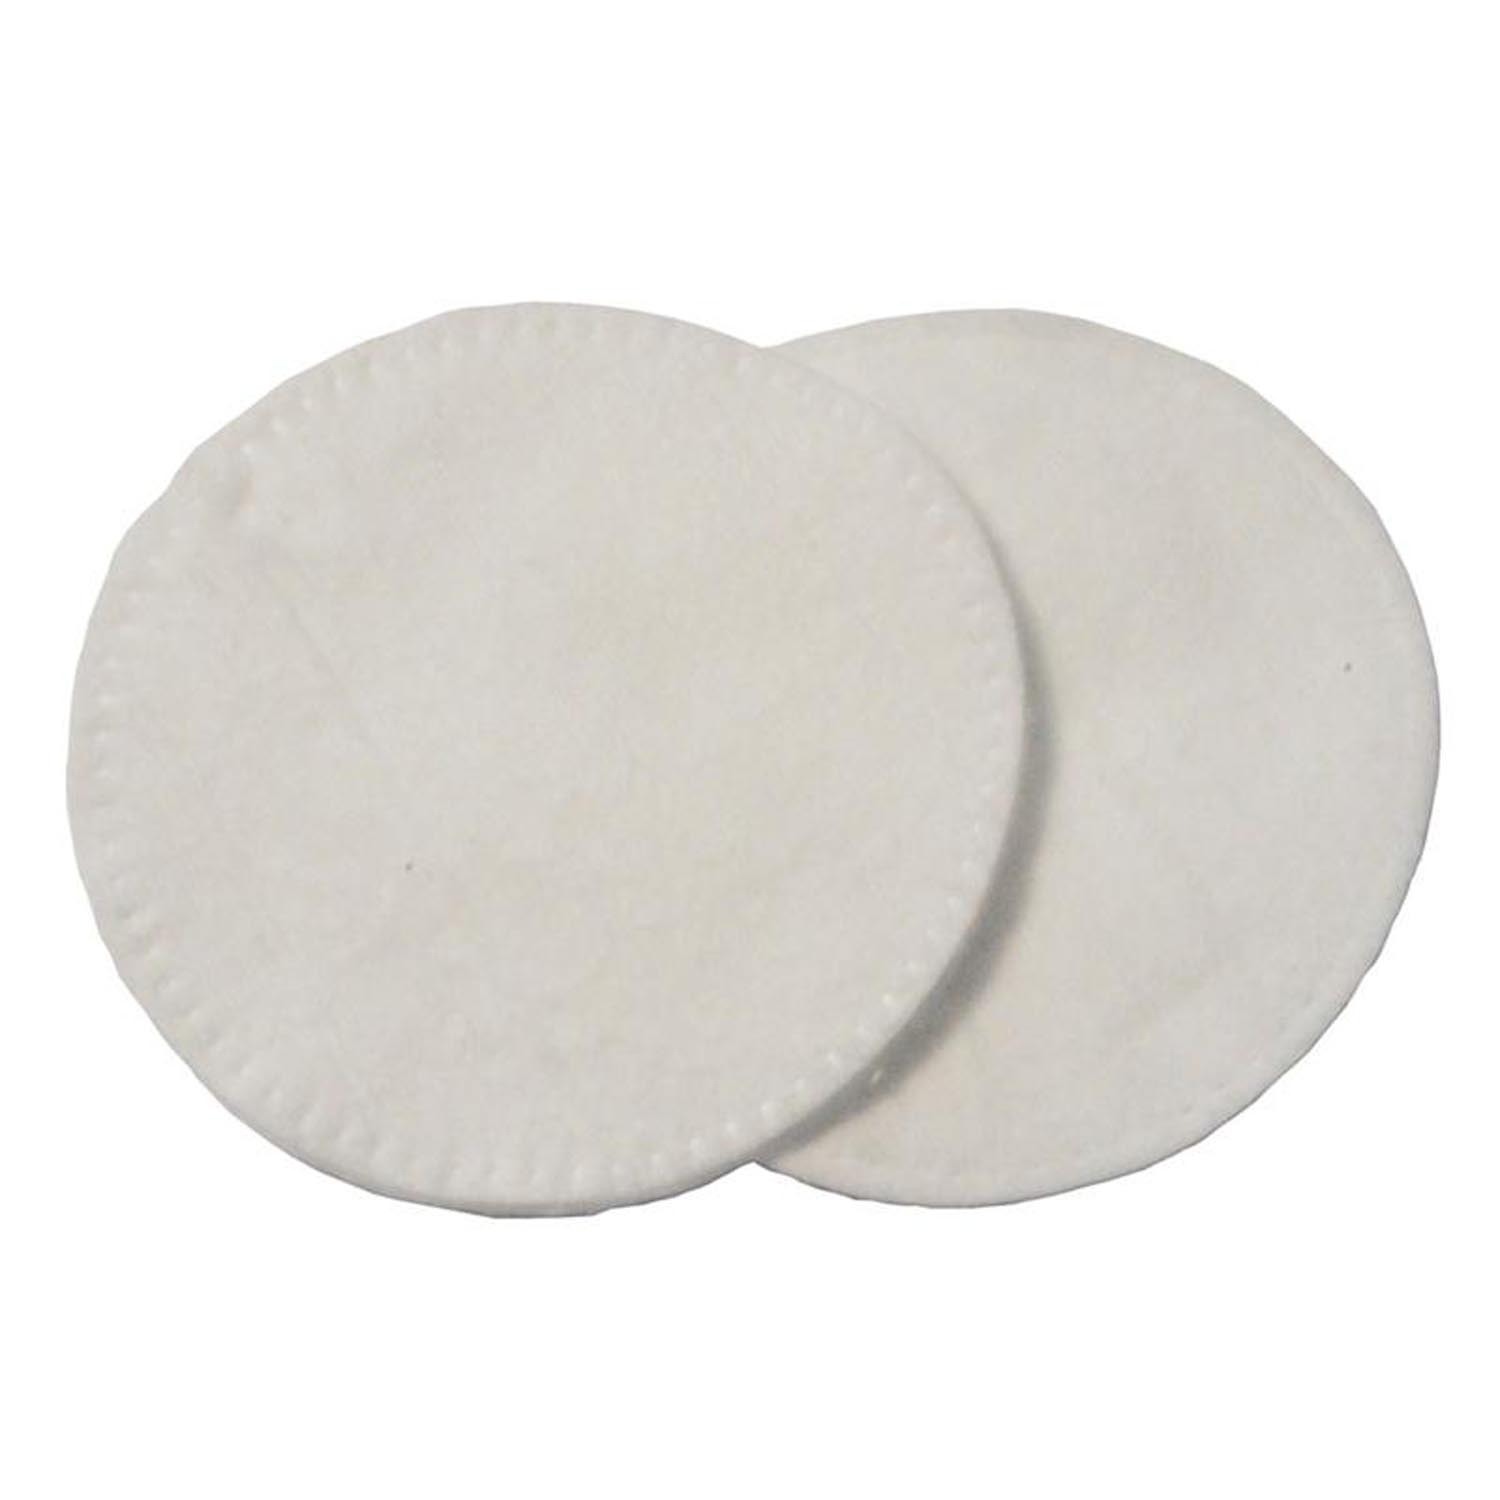 Pack of 100 Simply Soft Round Cosmetic Pads - White Image 2